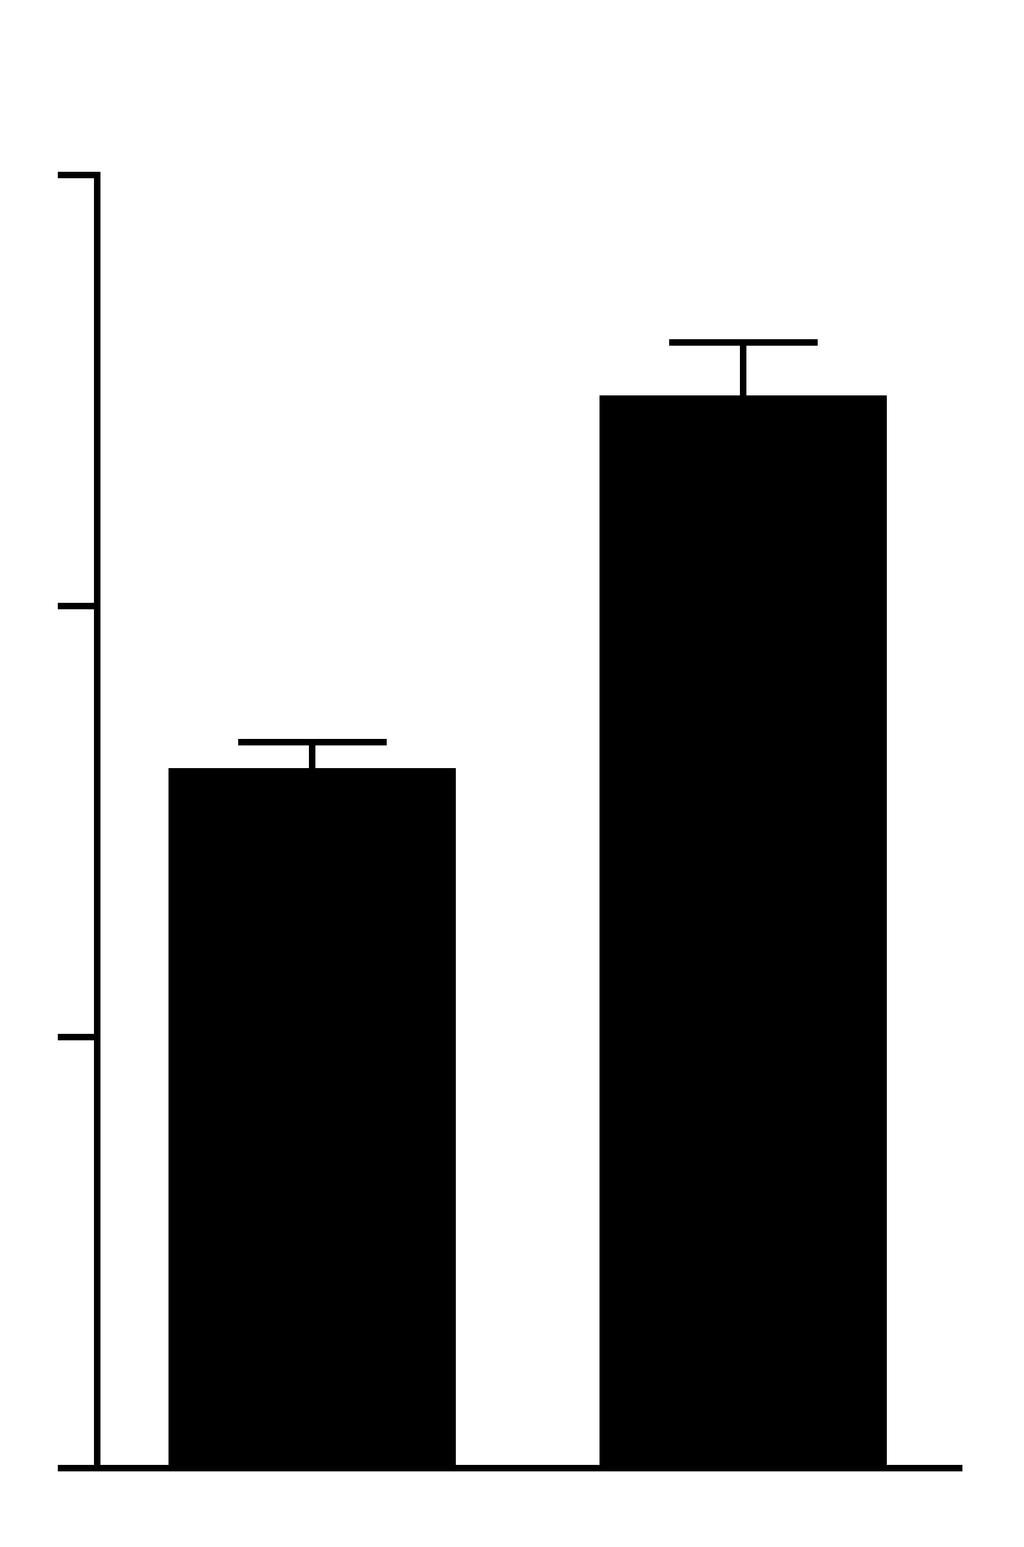 A B Eotaxin-1 (pg / mg total protein) 45 3 15 PBS ** Chitin Eosinophils (x1 5 ) 7. 6. 5. 4. 3. 2. 1.. * Ccr3 -/- Figure S2, related to Figure 2.